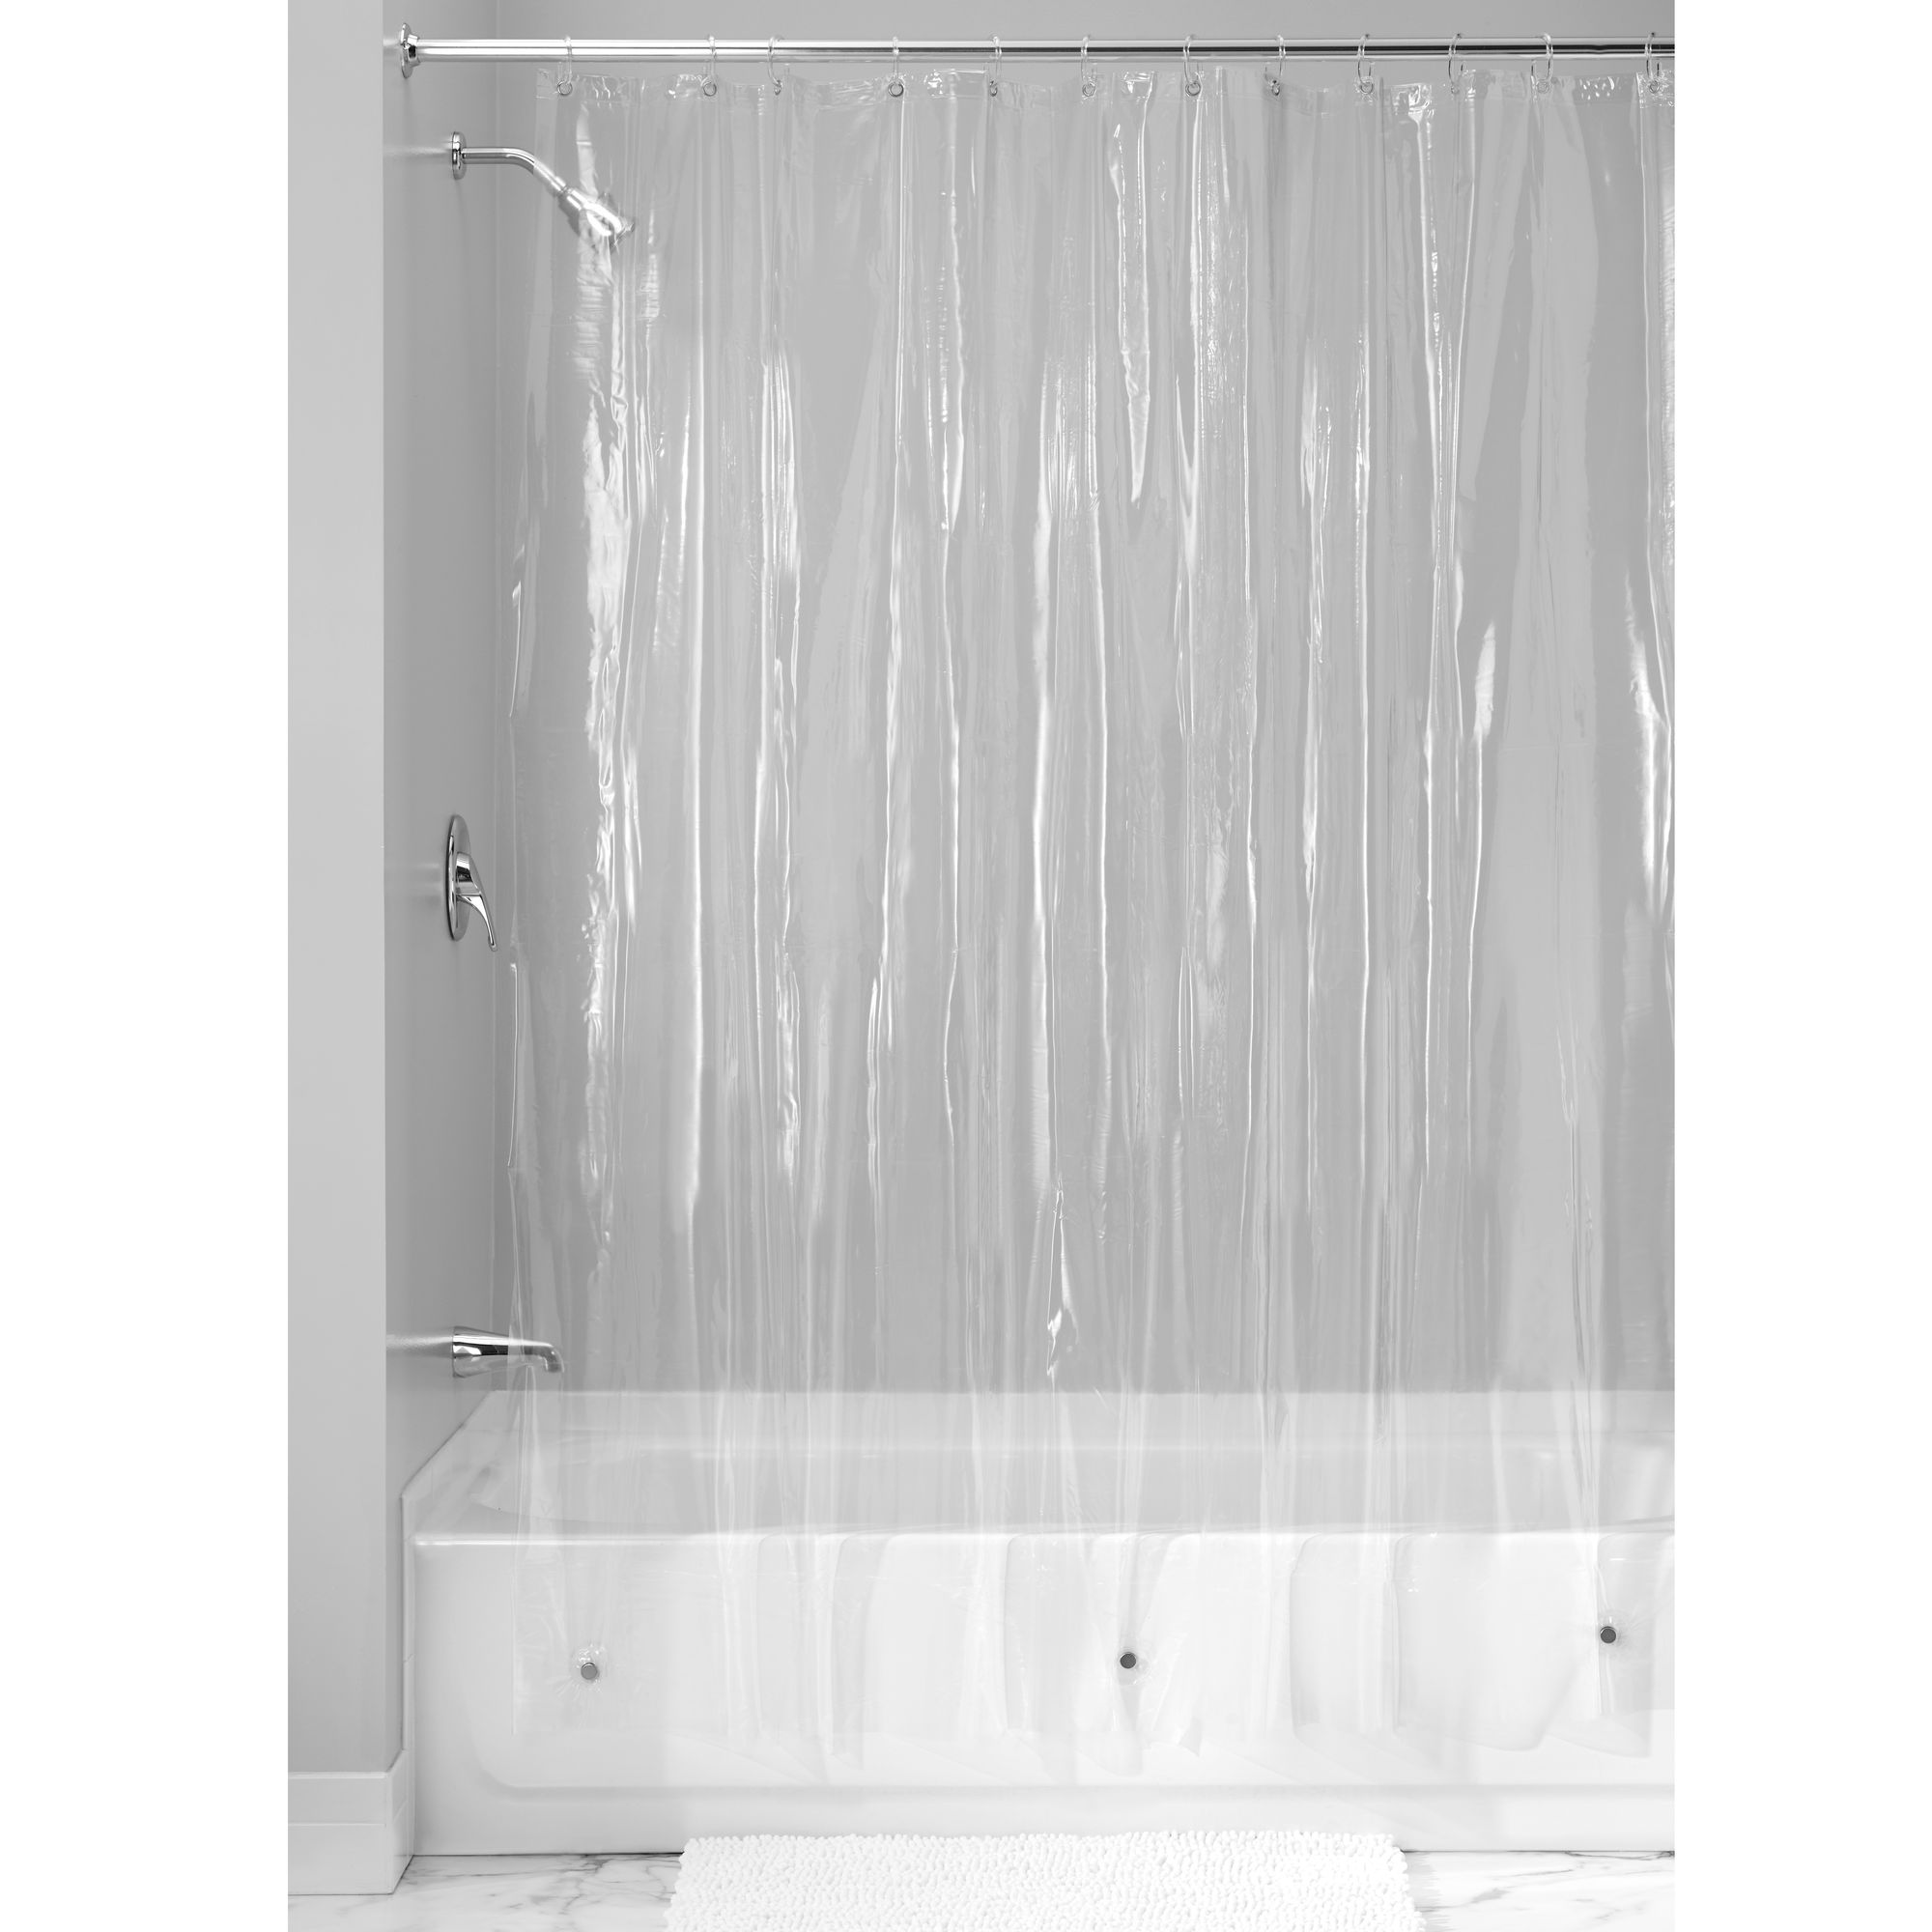 Custom Fabric Shower Curtain Small, Extra Wide Shower Curtain Liner 84 X 72 Inch